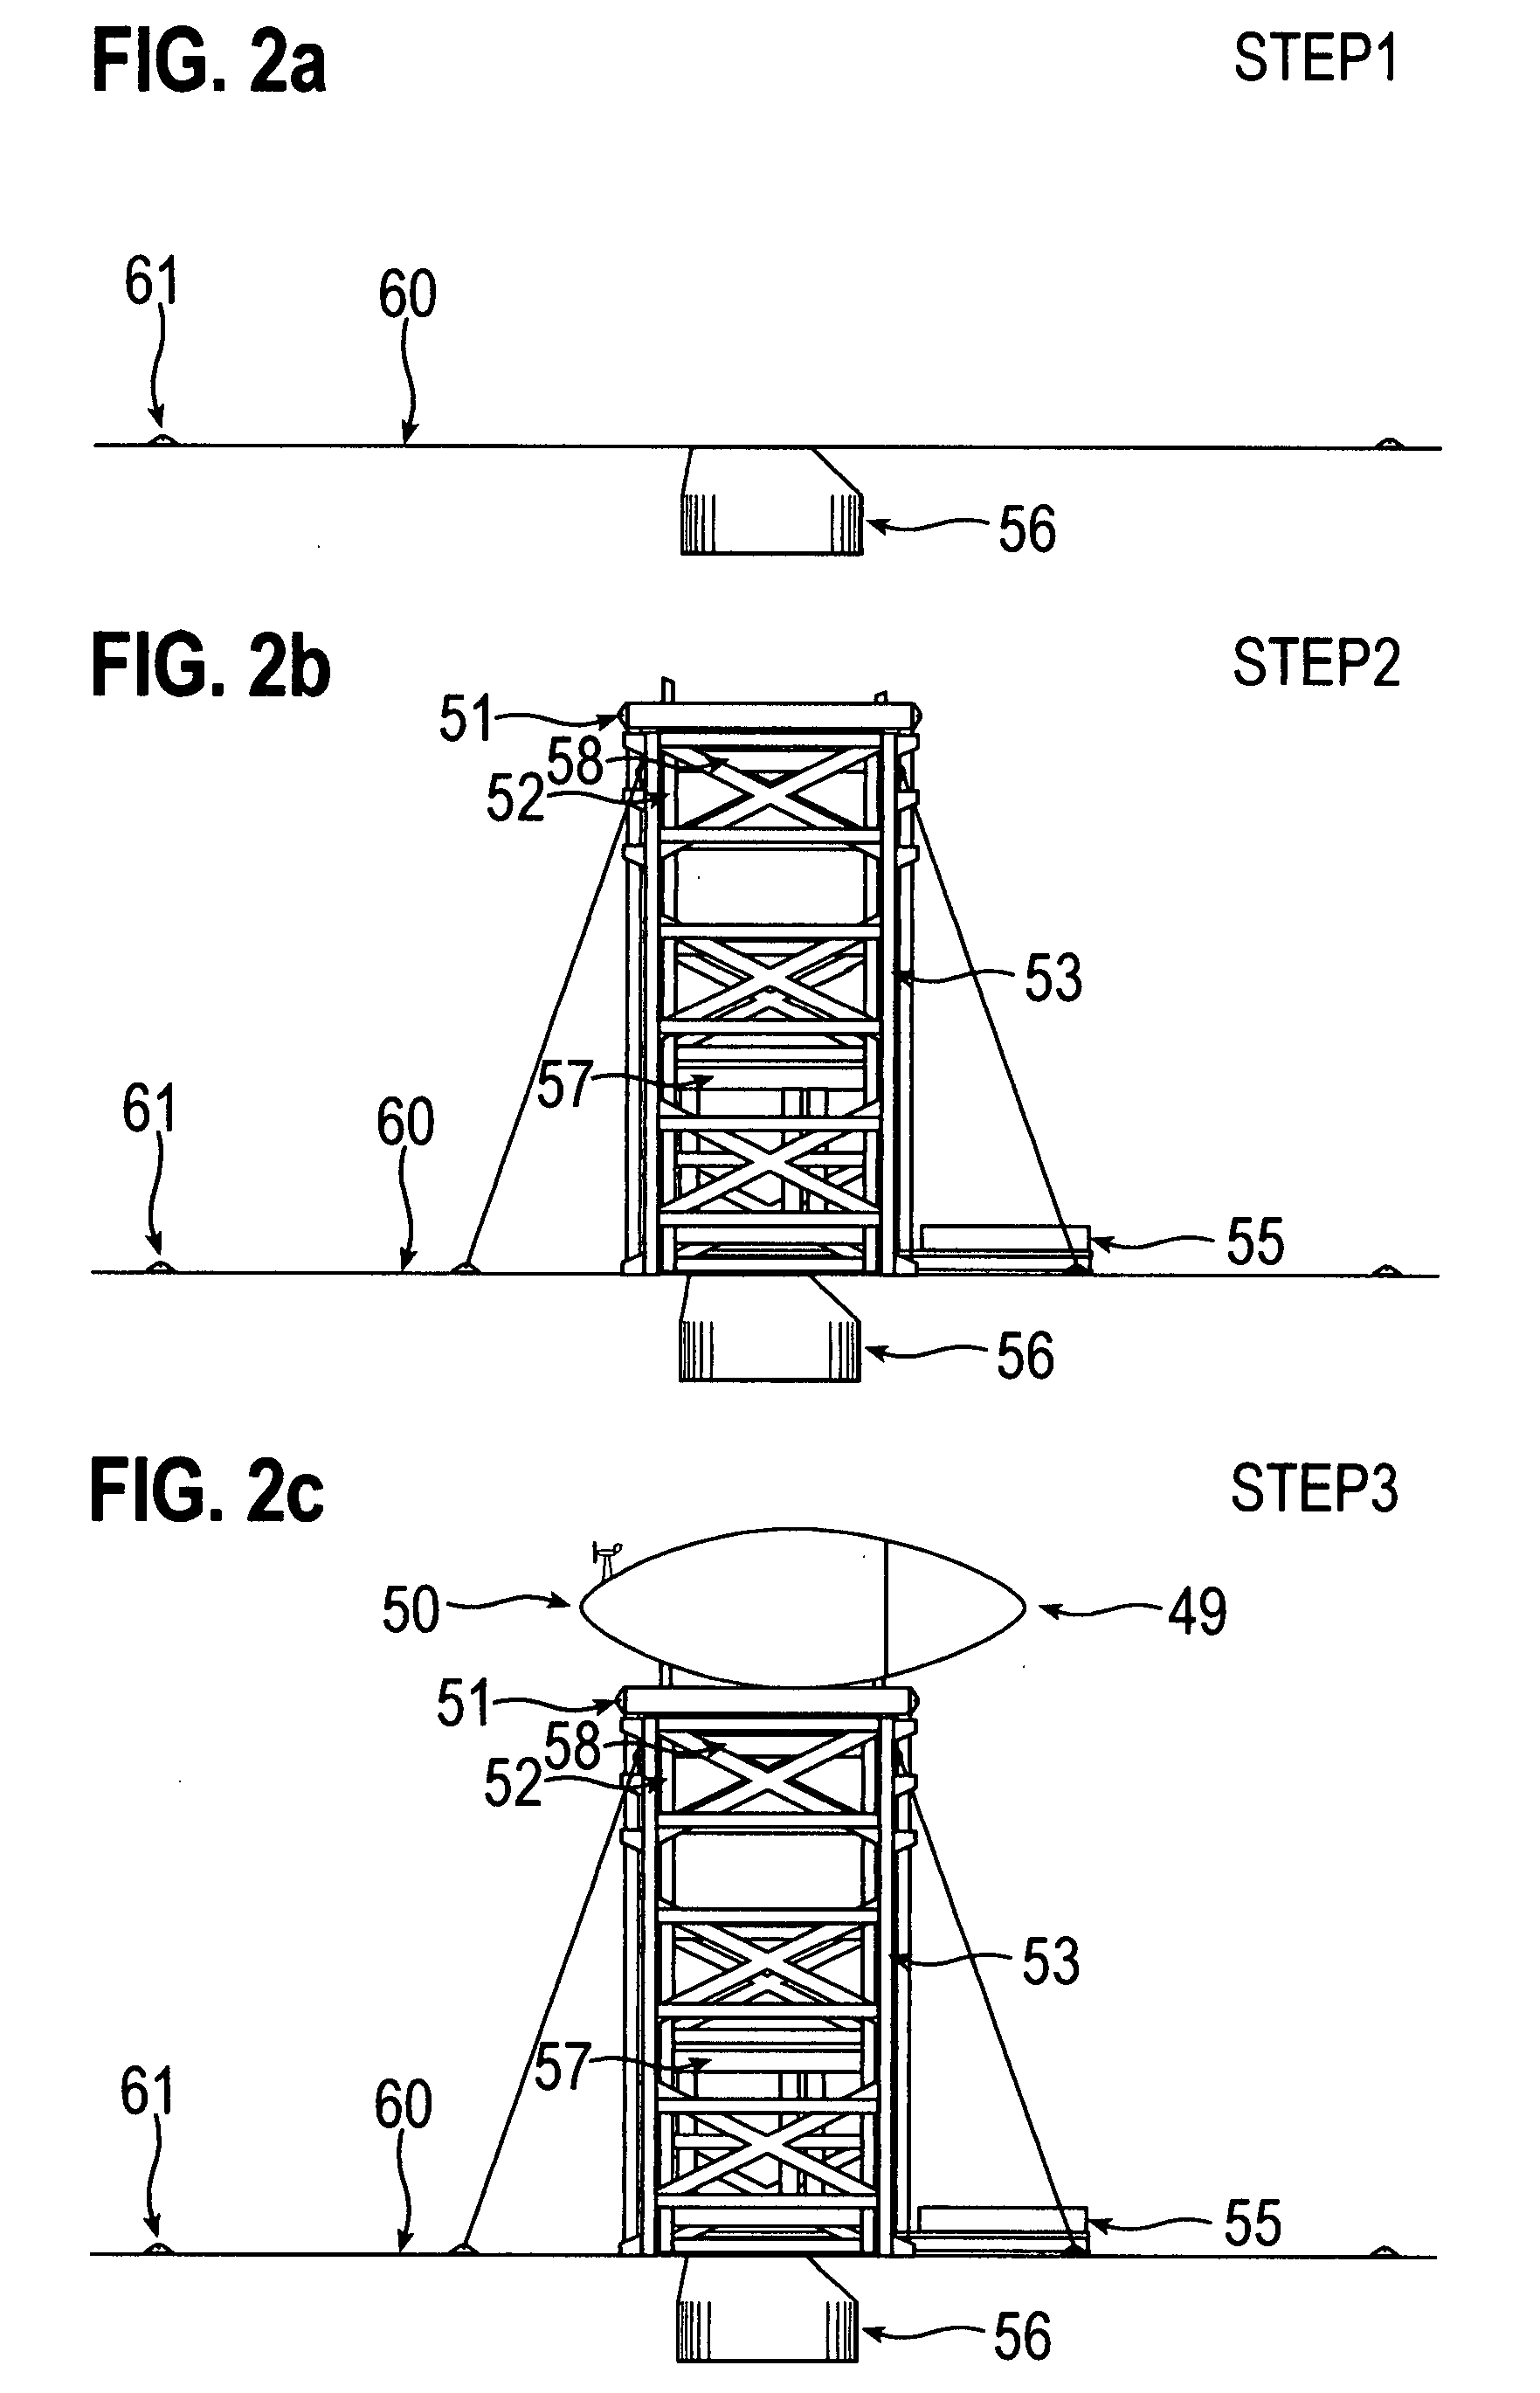 Vertically Adjustable Horizontal Axis Type Wind Turbine And Method Of Construction Thereof